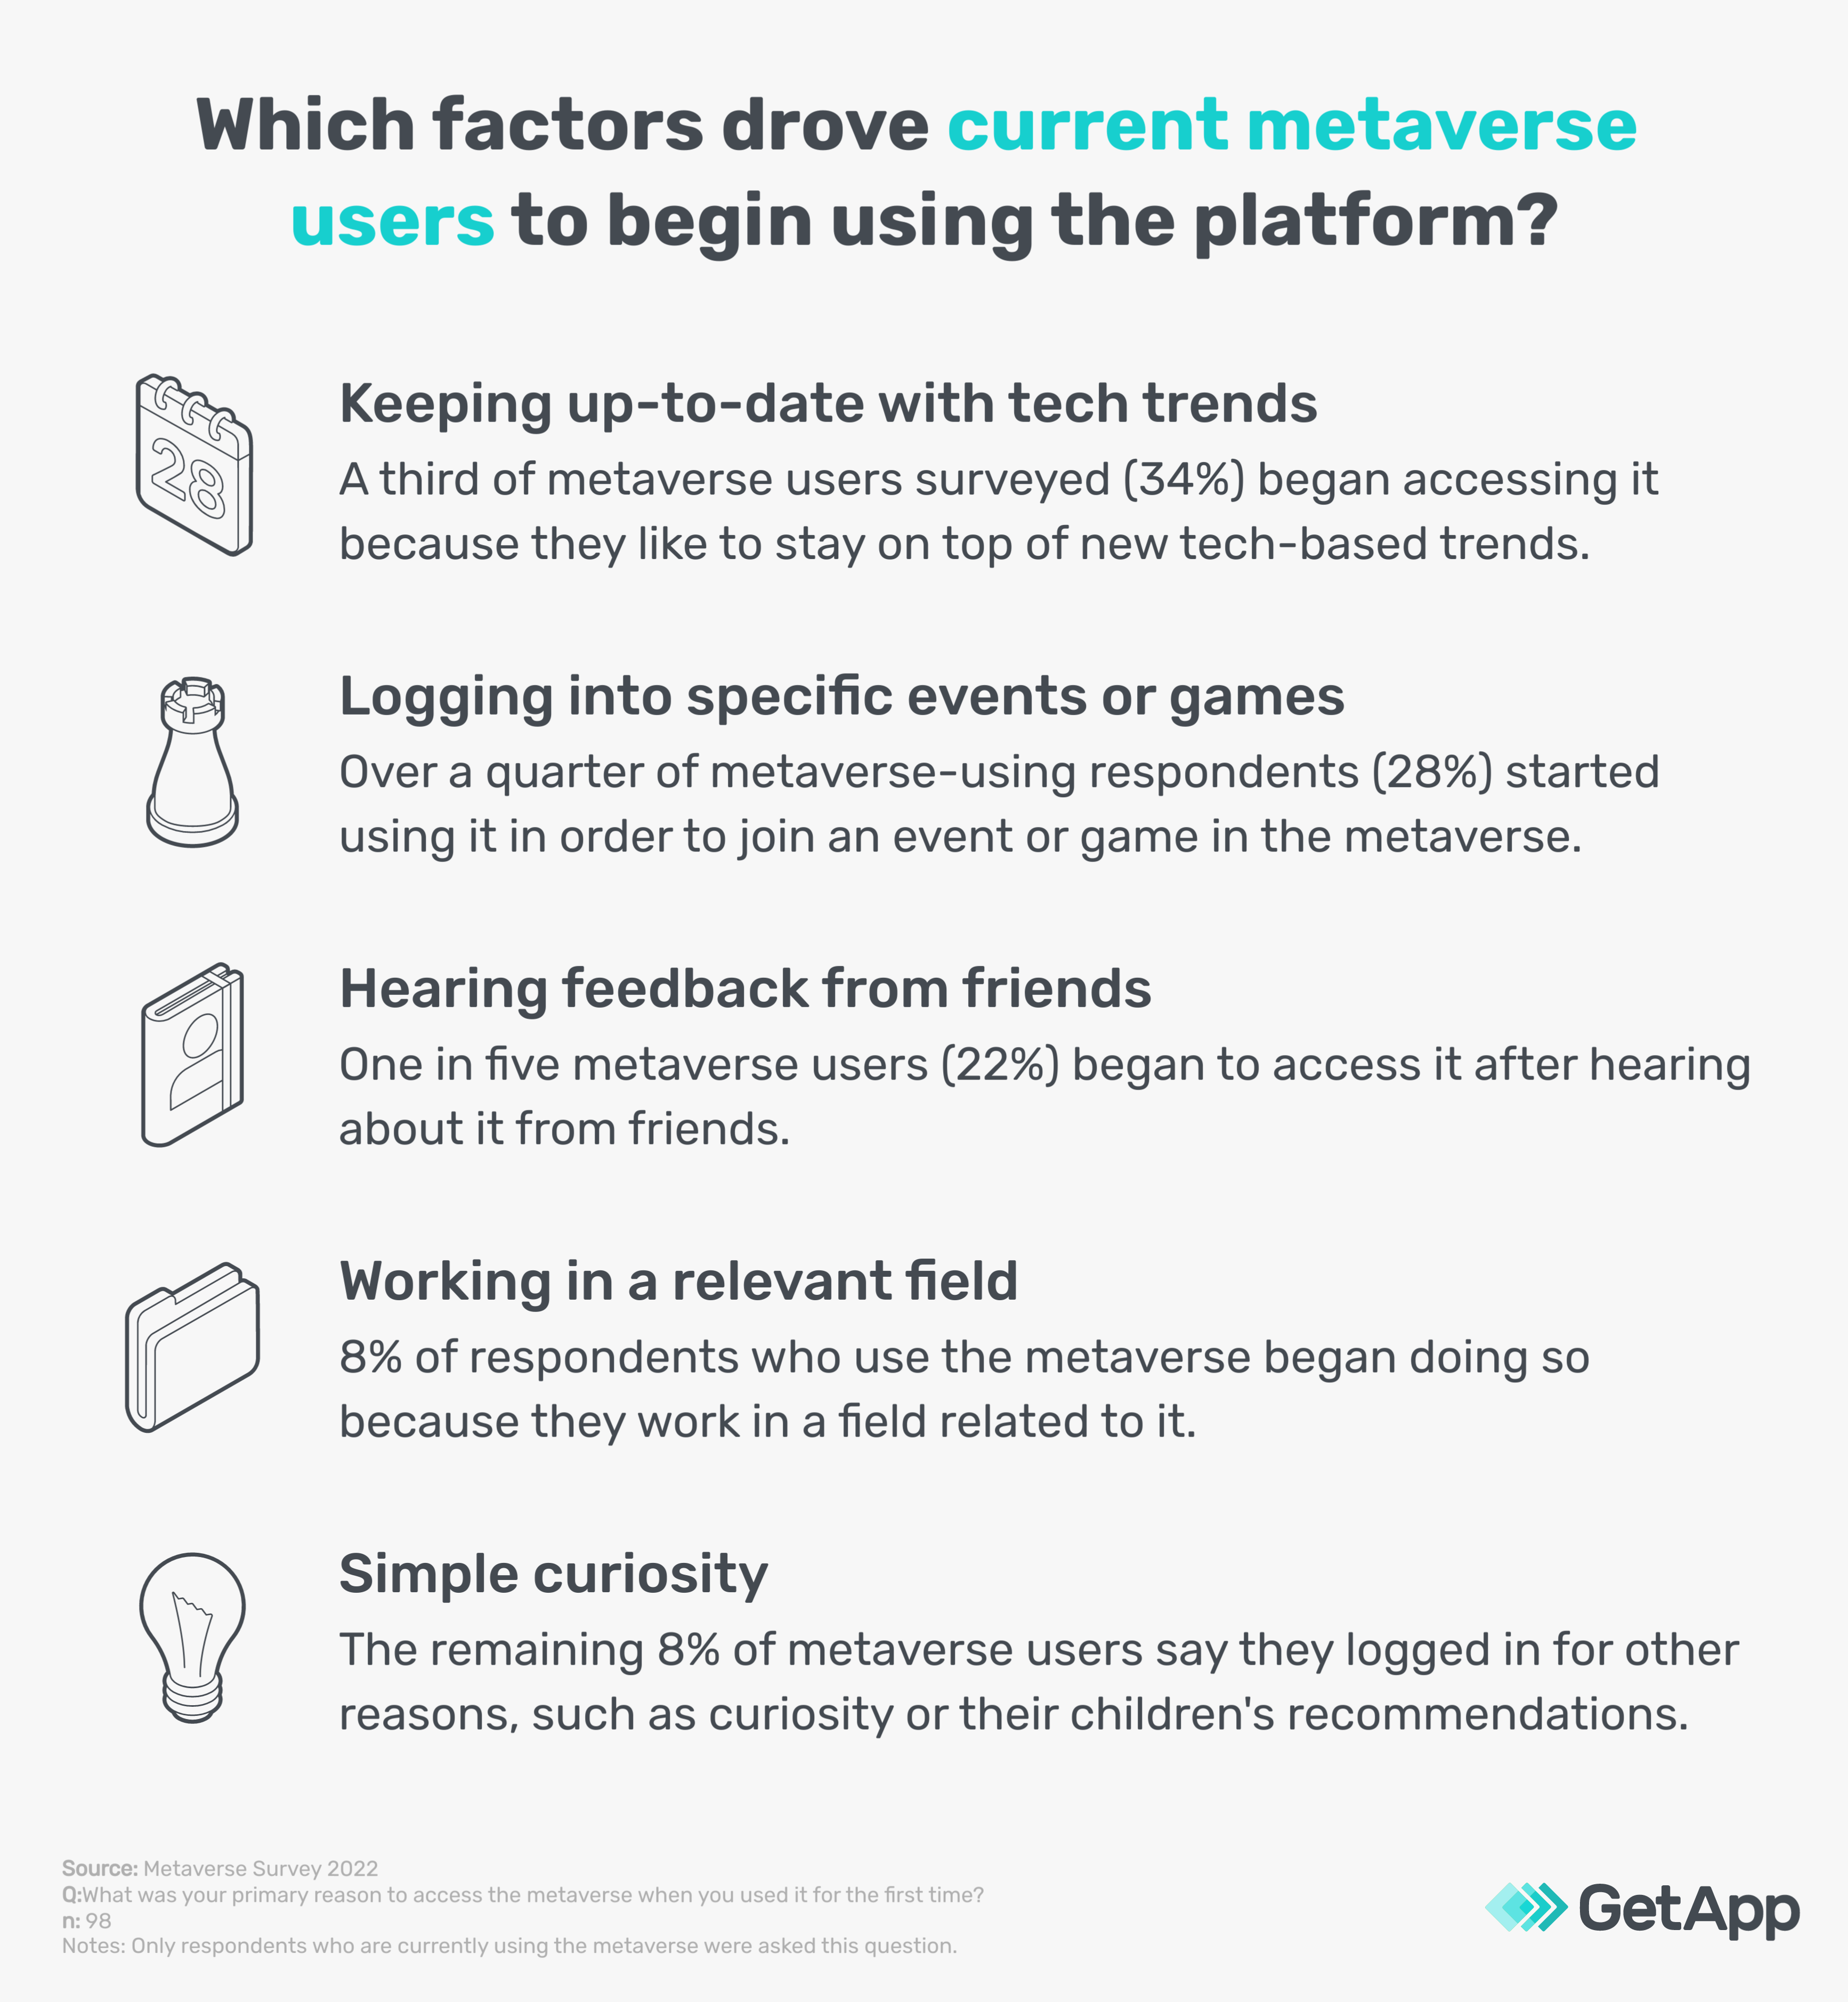 reasons for trying the metaverse